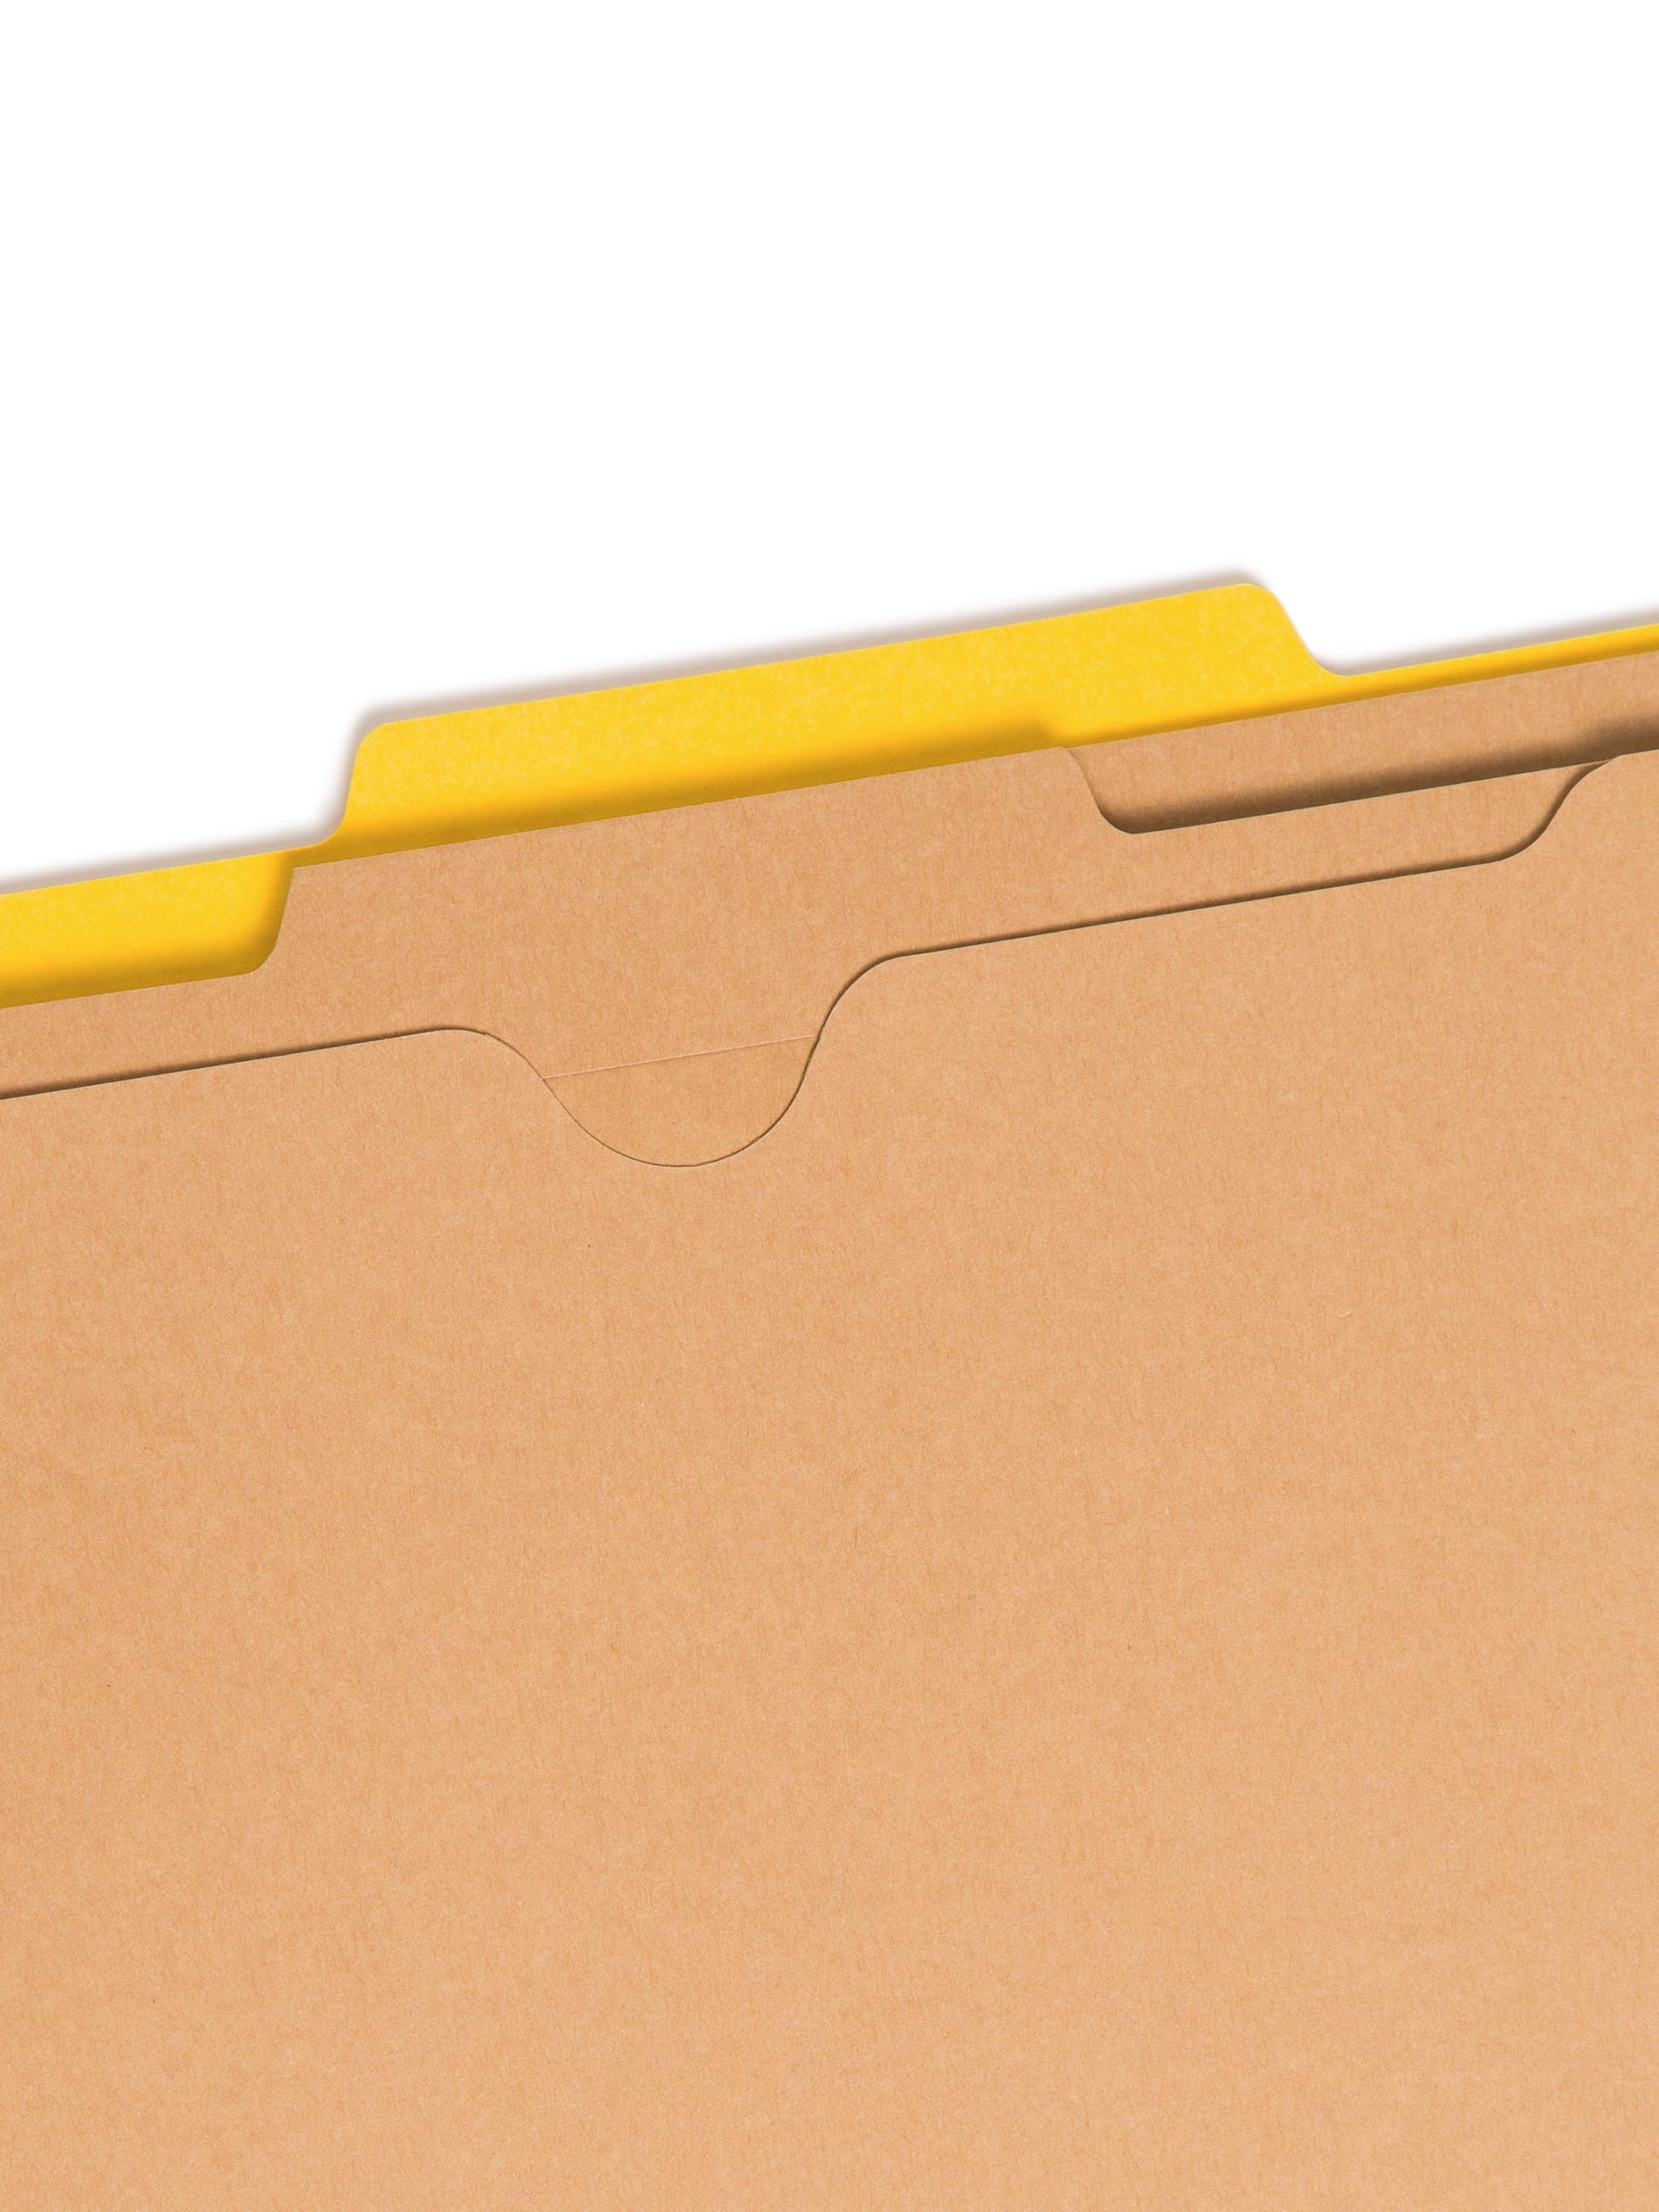 SafeSHIELD® Pressboard Classification File Folders with Pocket Dividers, Yellow Color, Letter Size, 